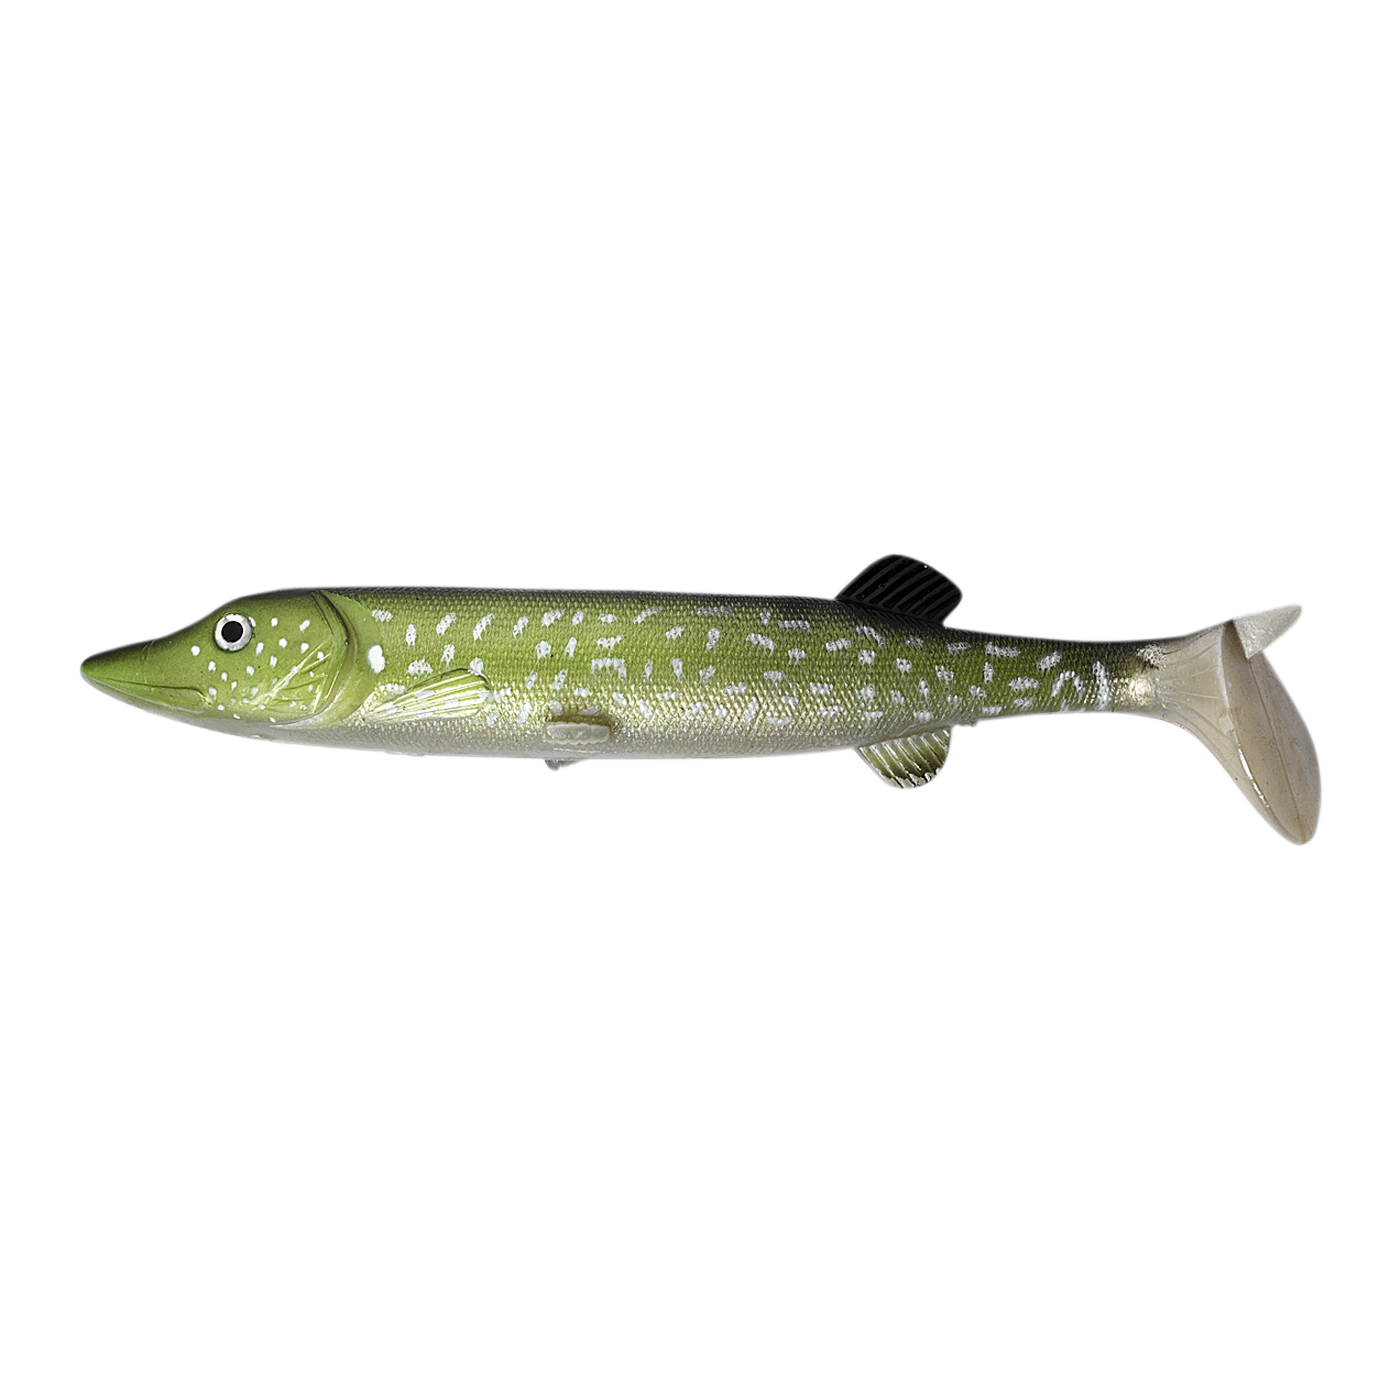 Behr Behr Trendex Pike-Natural XXL, with integrated lead head - Shad 